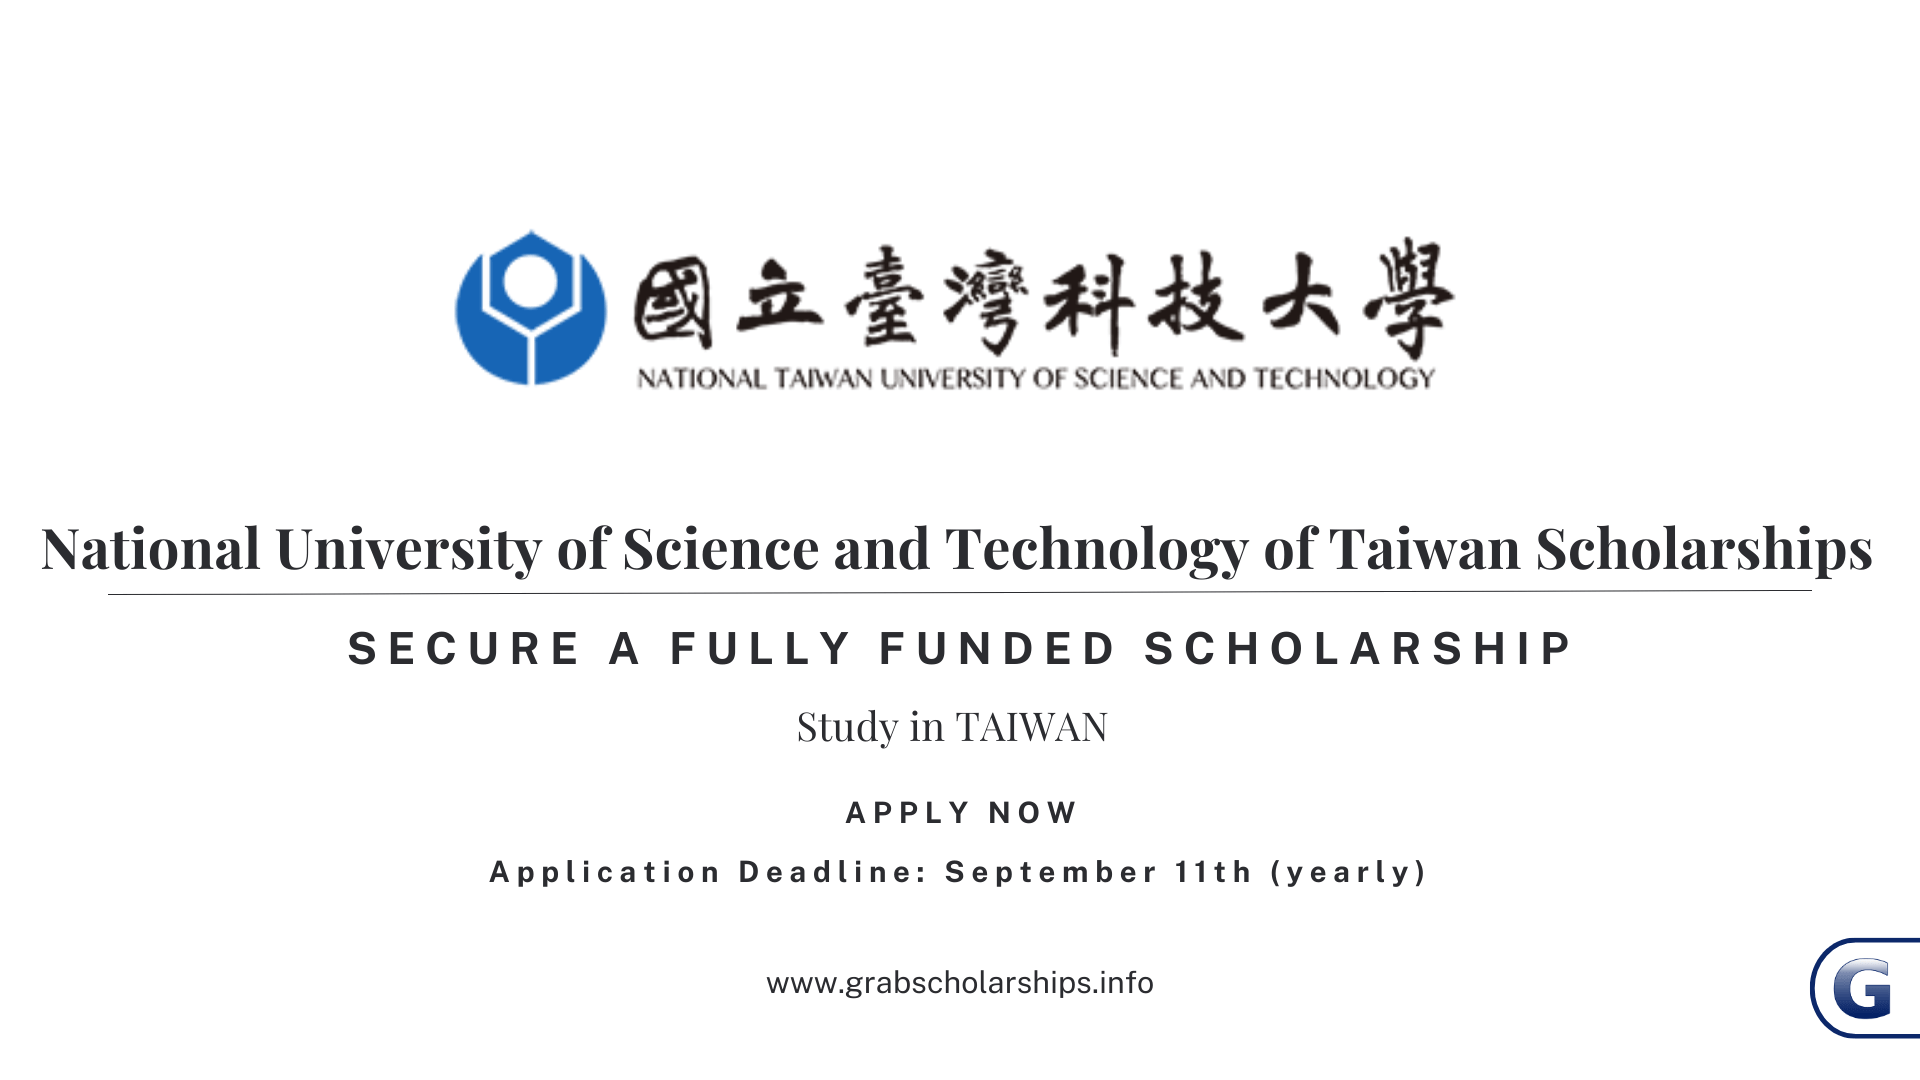 National University of Science and Technology of Taiwan Scholarships